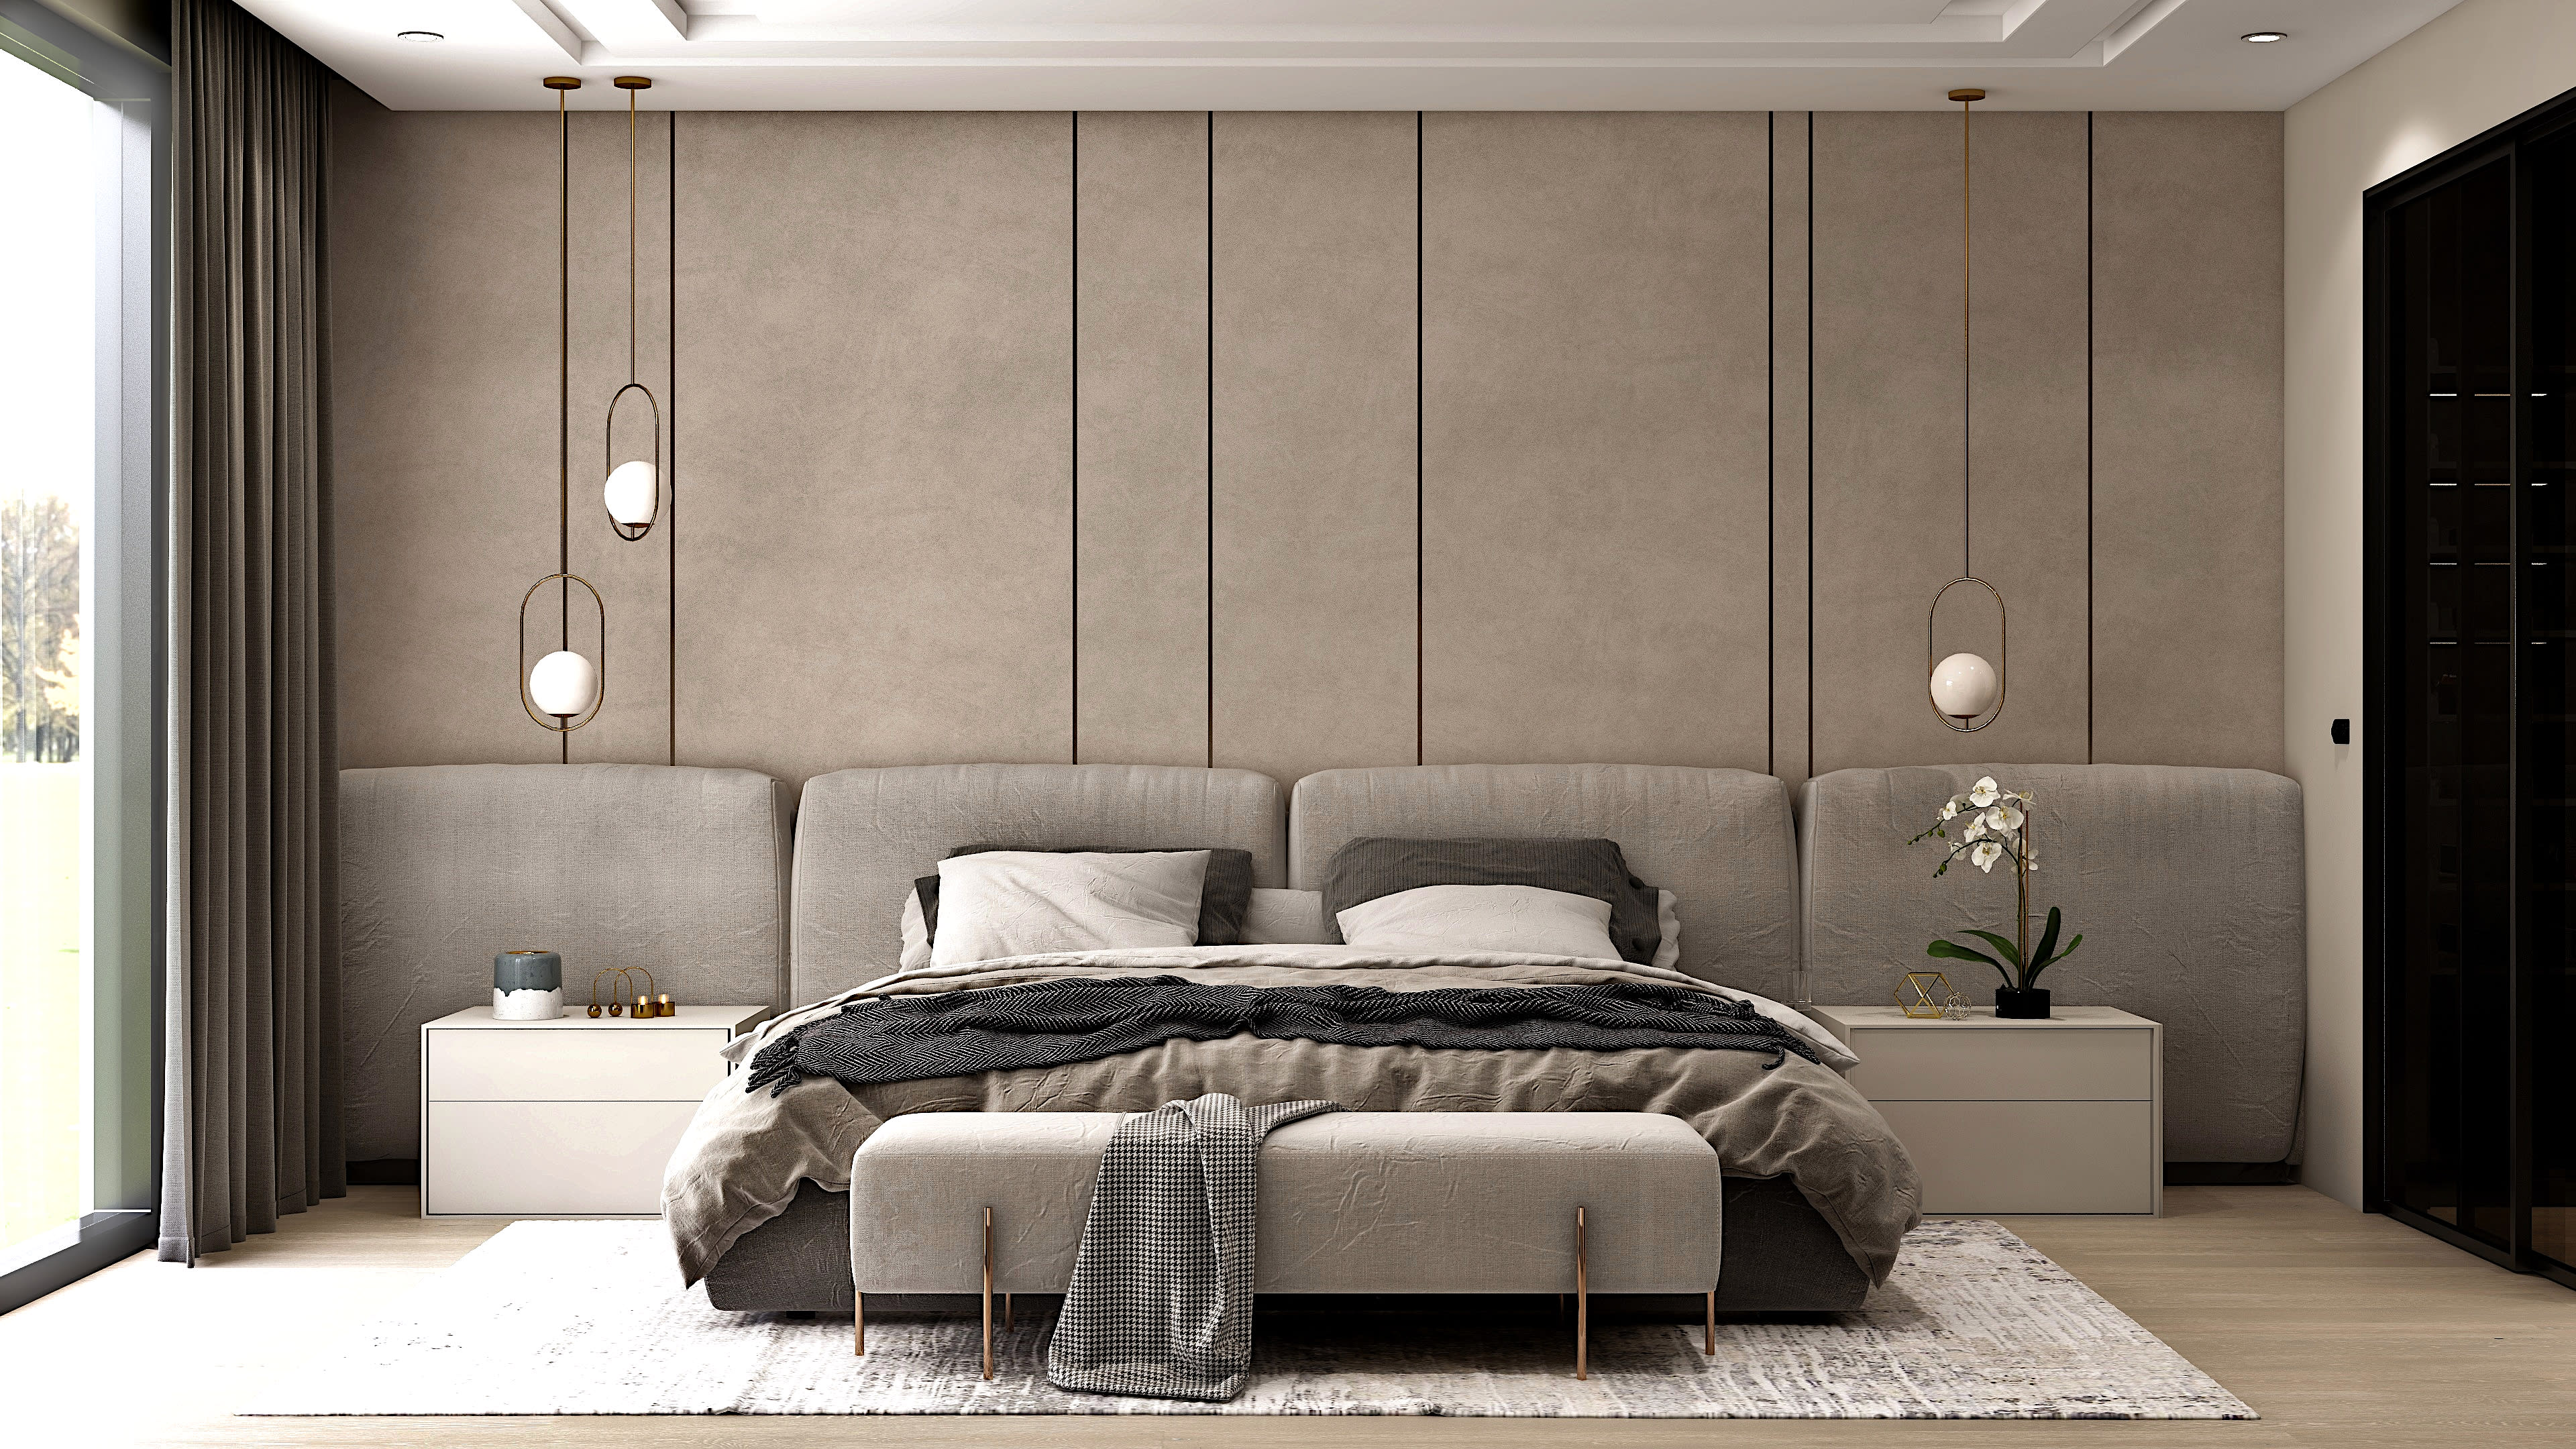 Do bedroom interior design and architectural 3d rendering by 